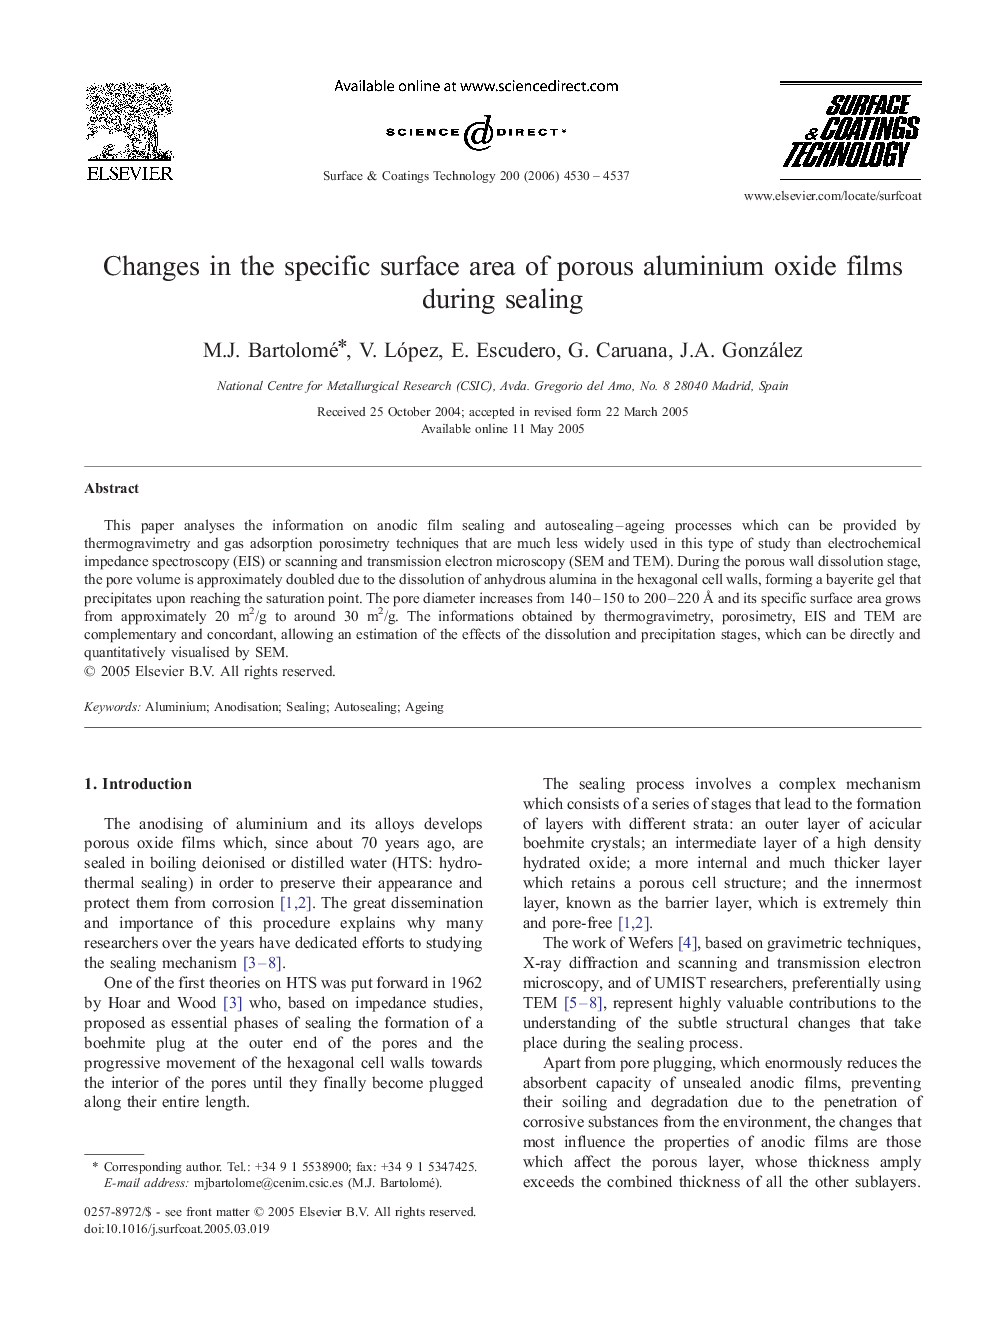 Changes in the specific surface area of porous aluminium oxide films during sealing